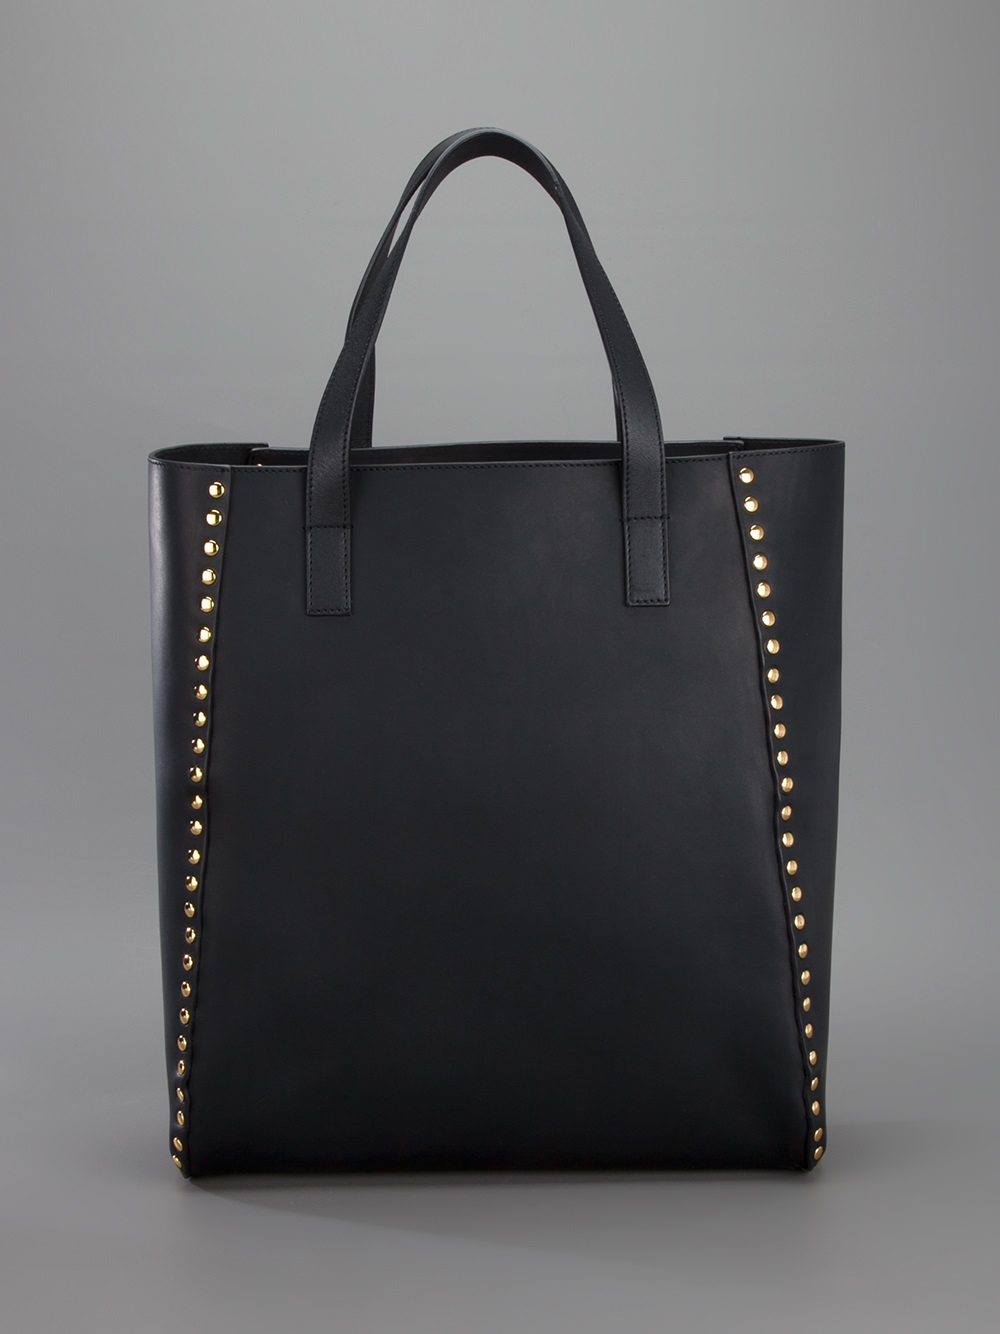 Marni Studded Tote in Black - Lyst